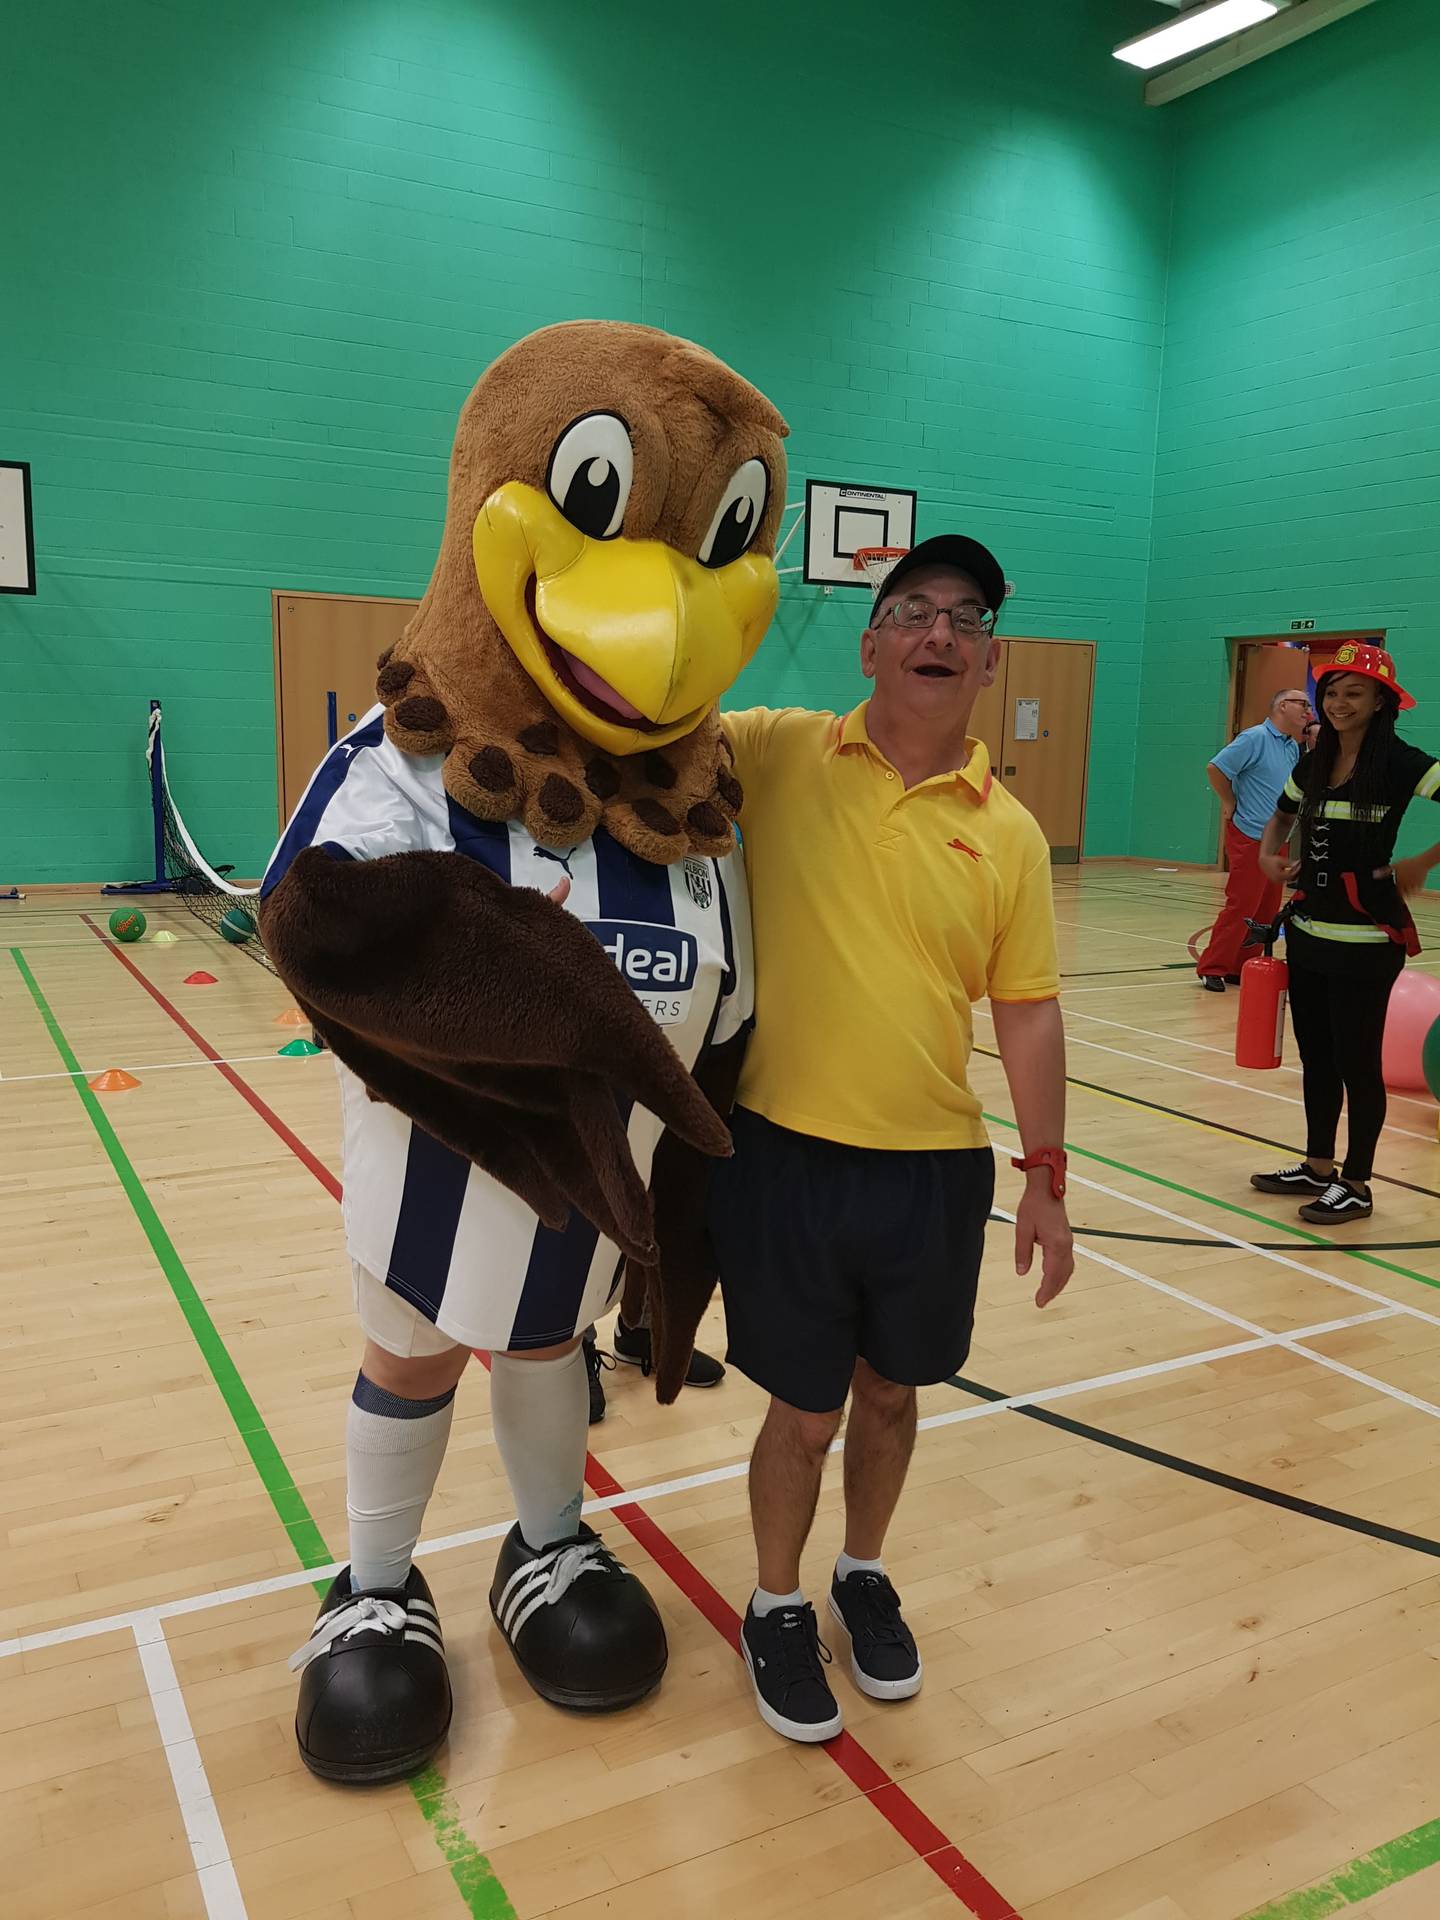 Portway mascot on the activity day